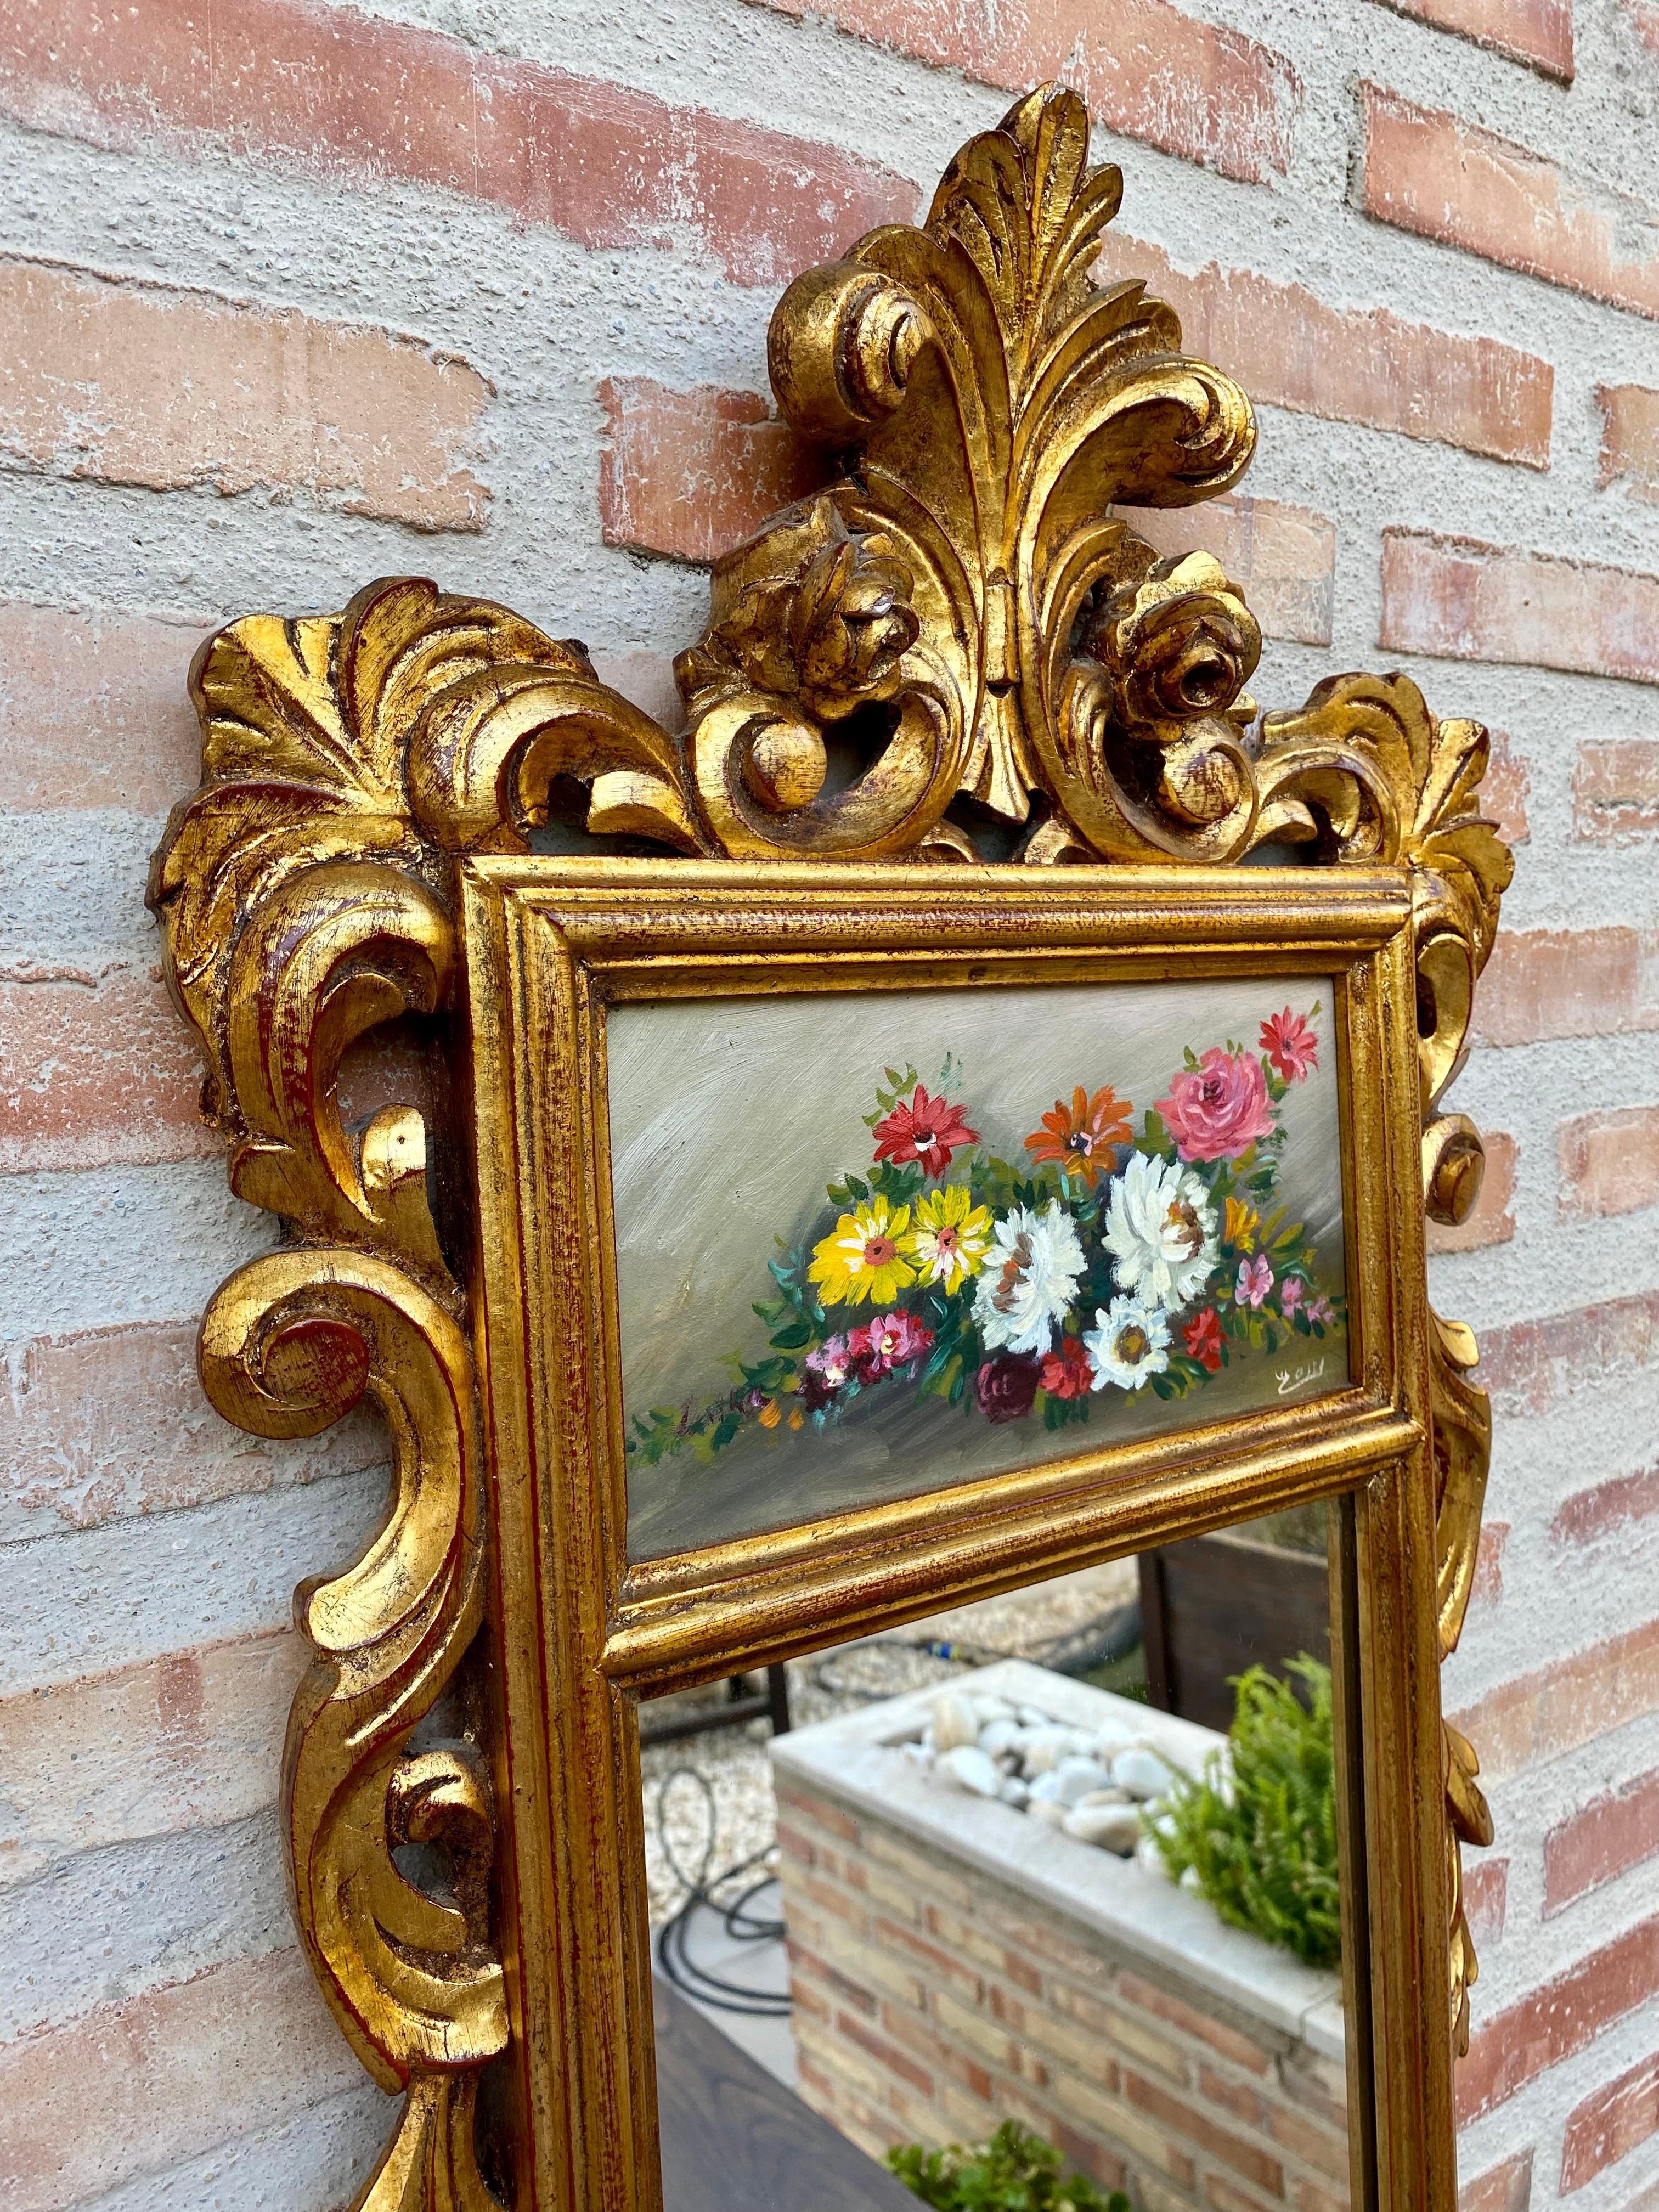 Beautiful French gilt carved wall mirror in French Rococo style with oil painting of floral motifs.
French Rococo style gilt carved French wall mirror with oil painting of floral motifs.
Stunning Italian carved wood and gilt gilt wall mirror from